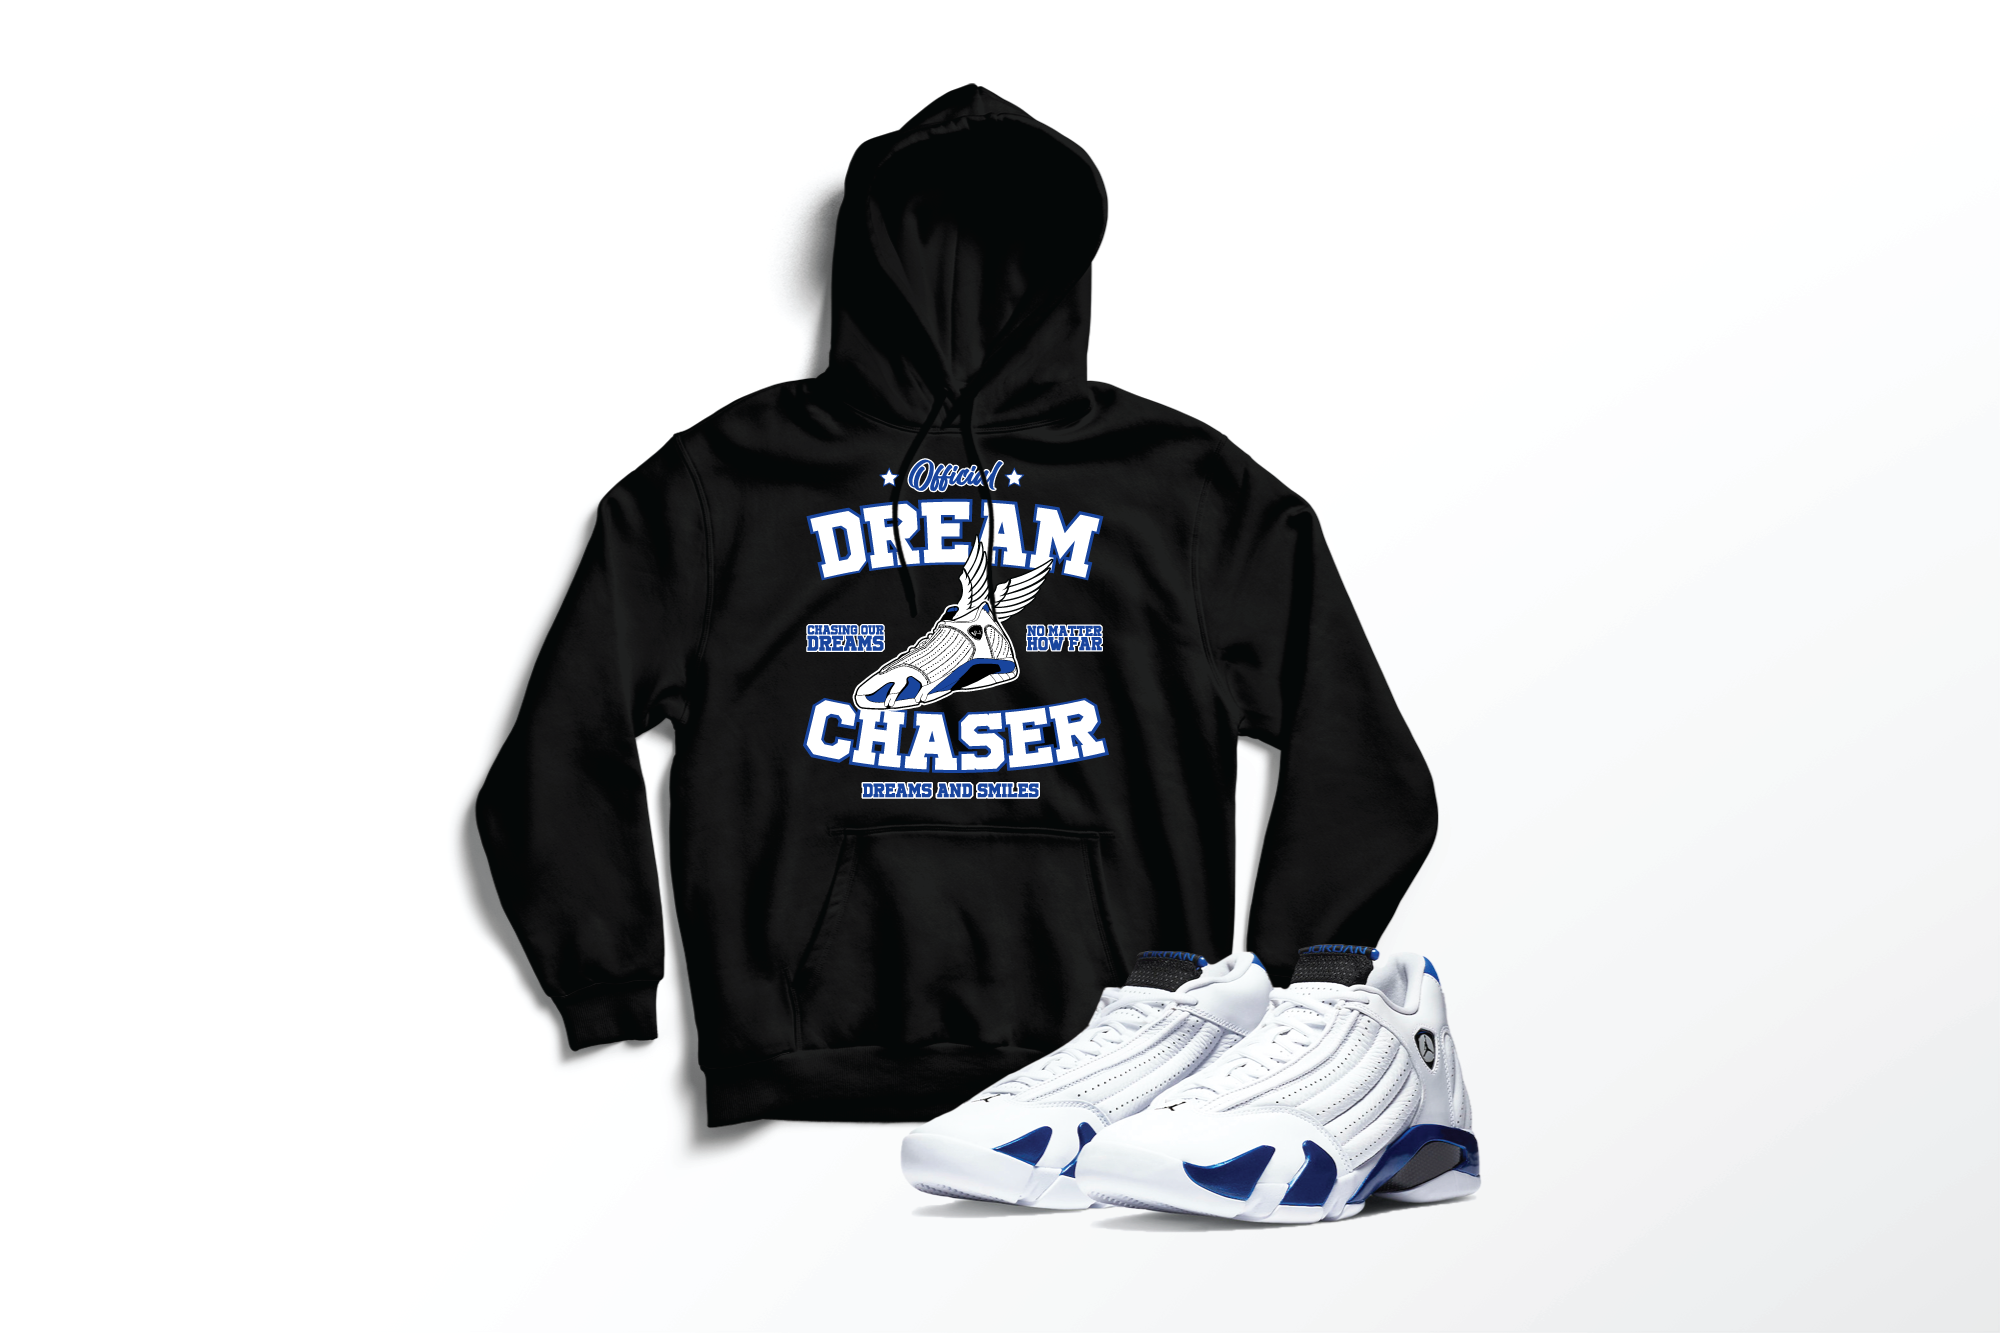 'Official Dream Chaser' Custom Graphic Hoodie To Match Air Jordan 14 Hyper Royal